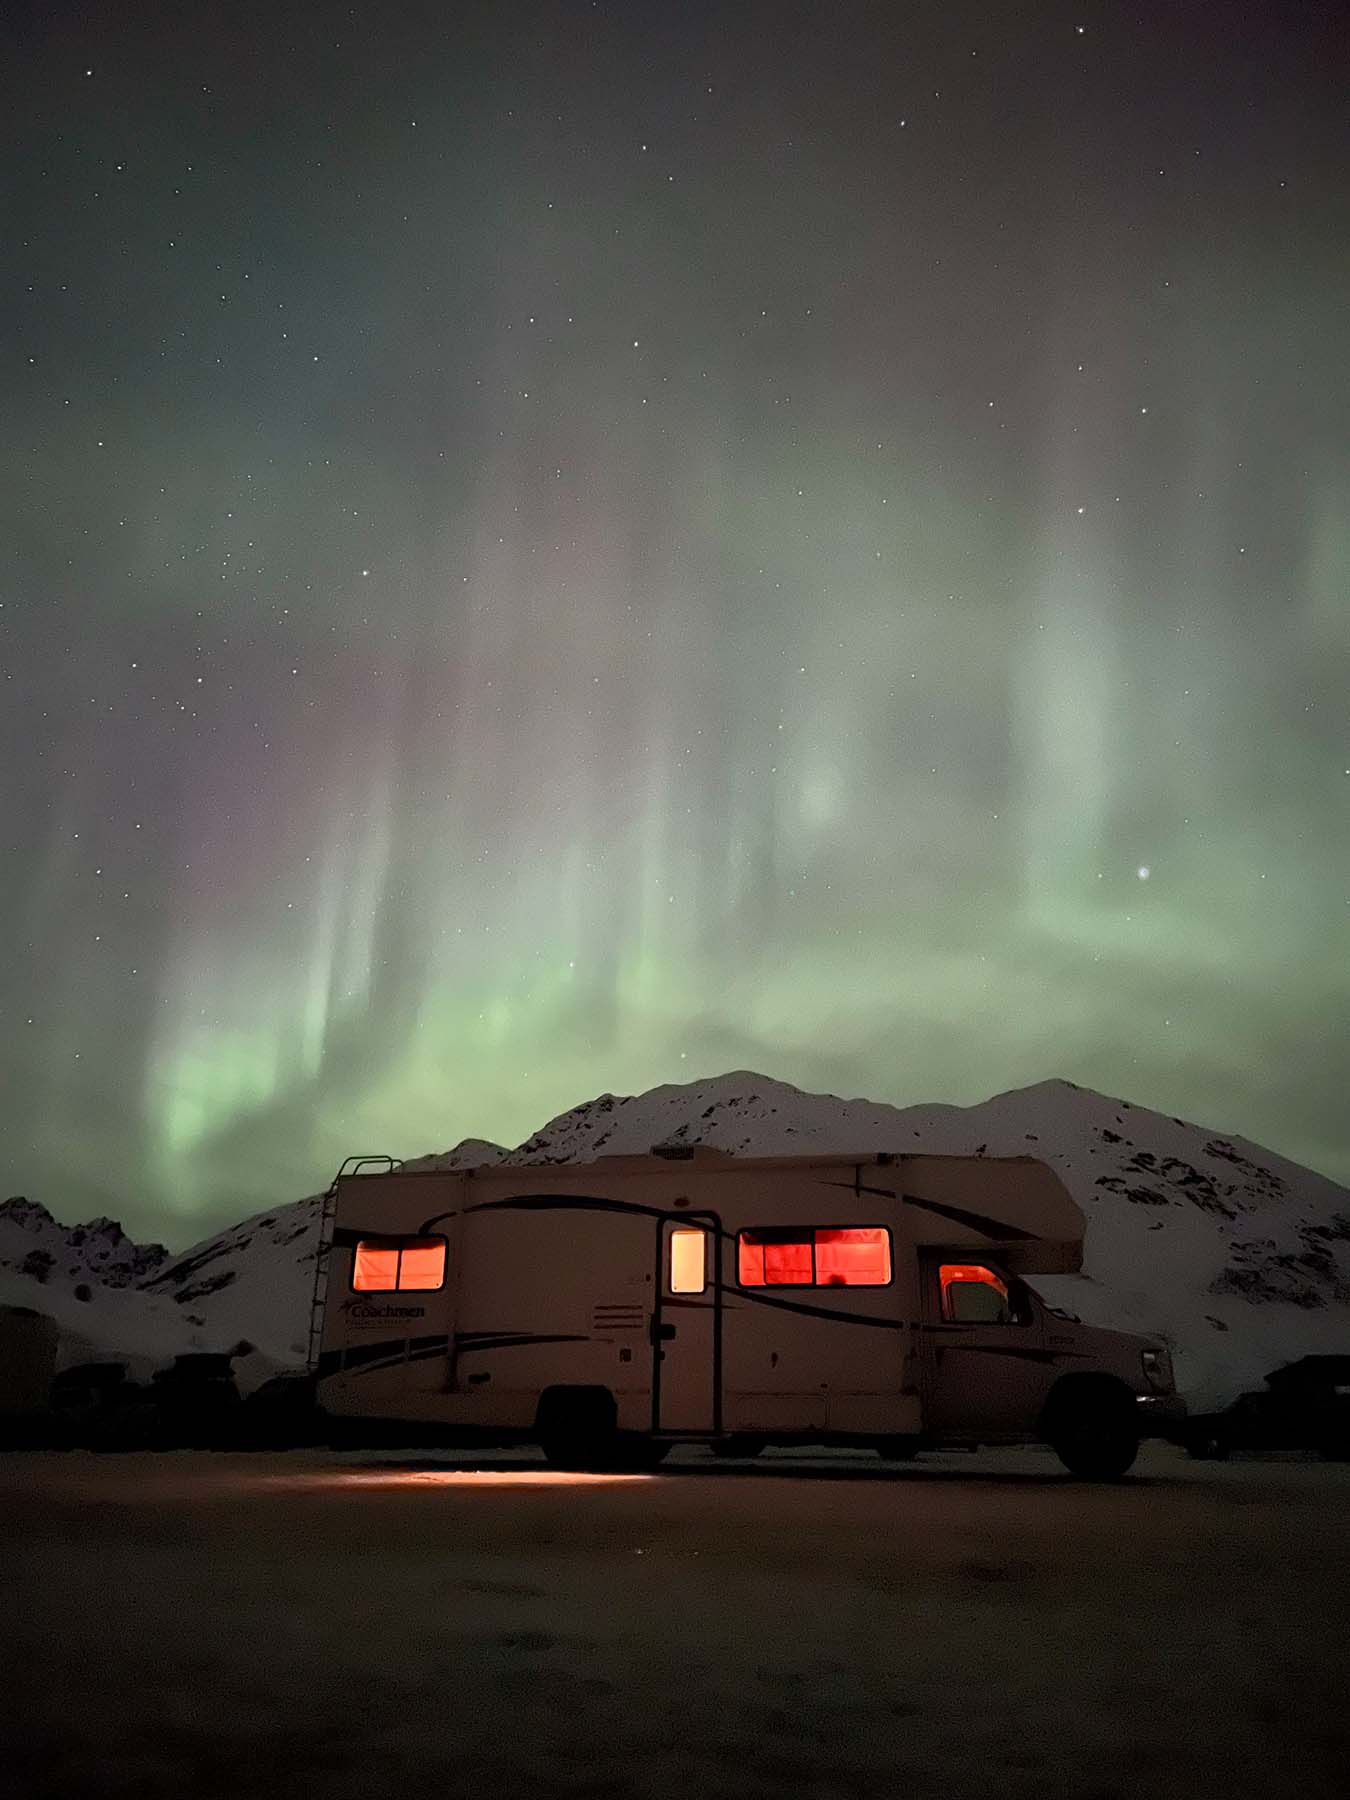 First night in the RV was magical!